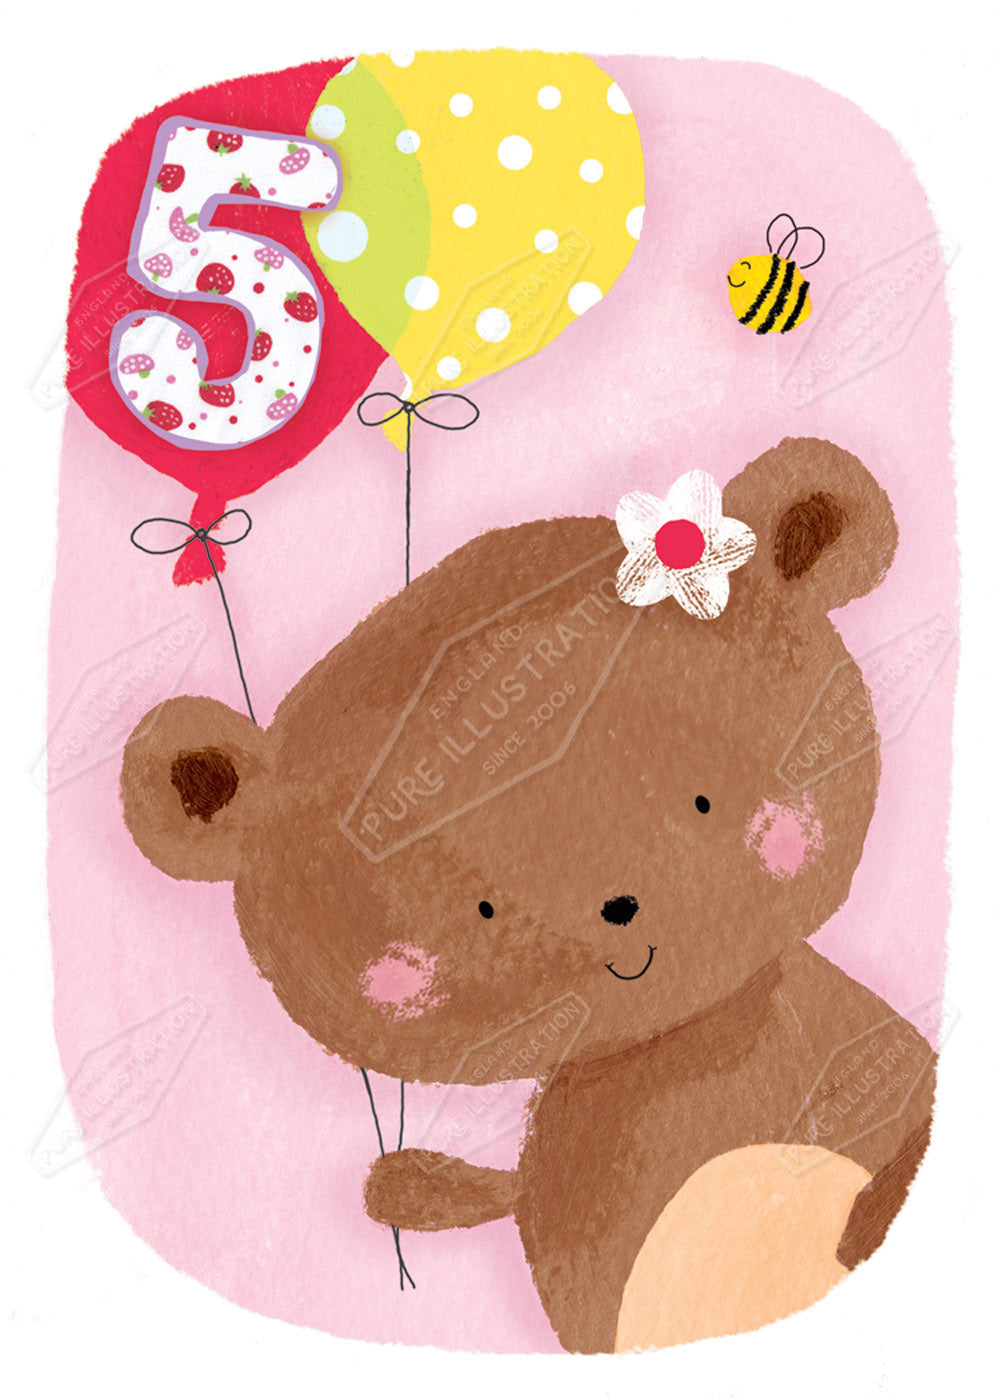 Birthday Cute Bear Card Greeting Card Design by Cory Reid for Pure art Licensing Agency & Surface Design Studio